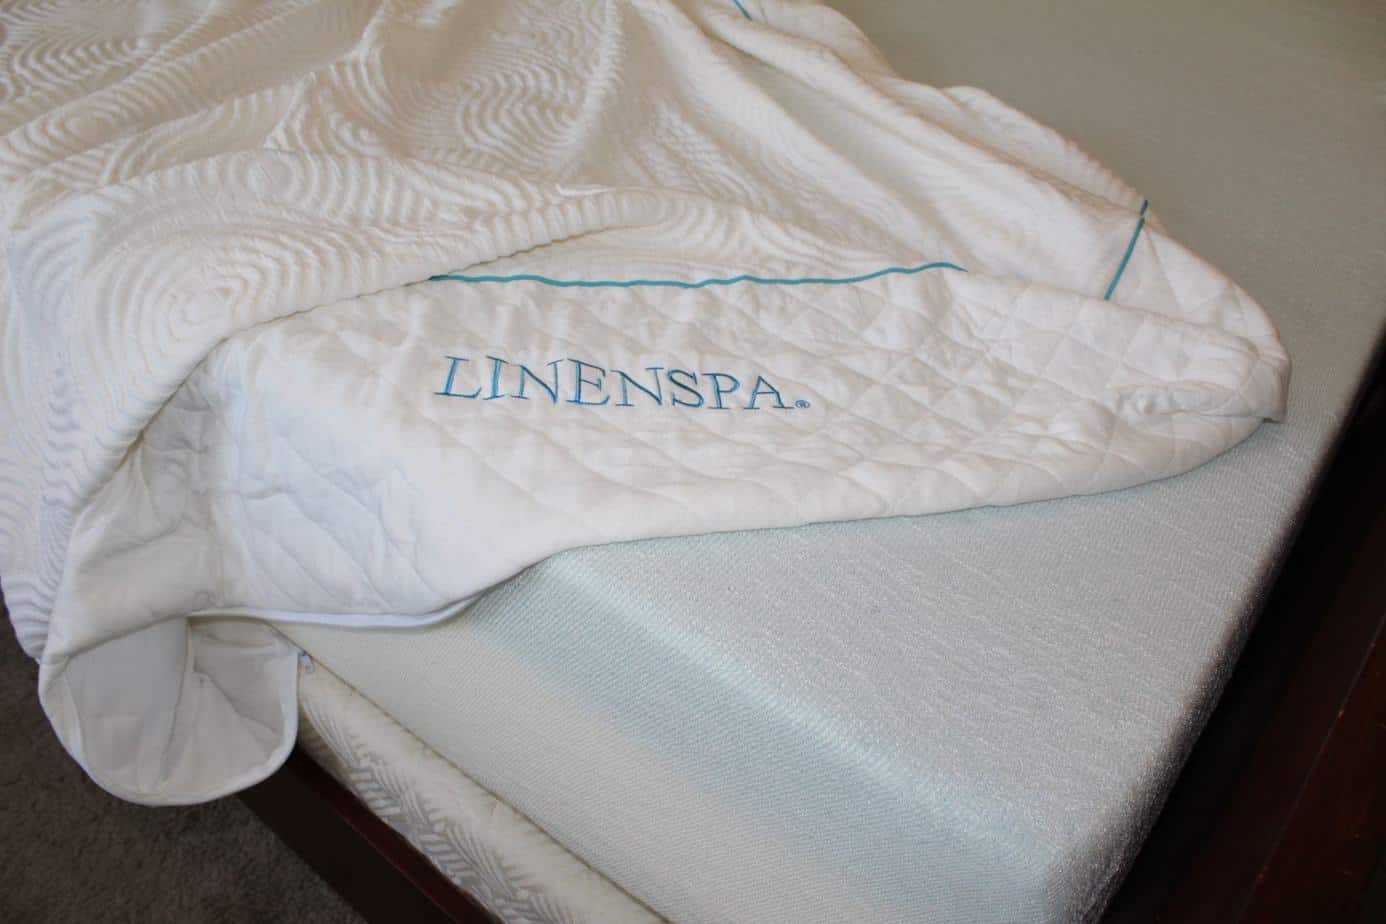 Linenspa mattress removable cover and 3.5" gel layer